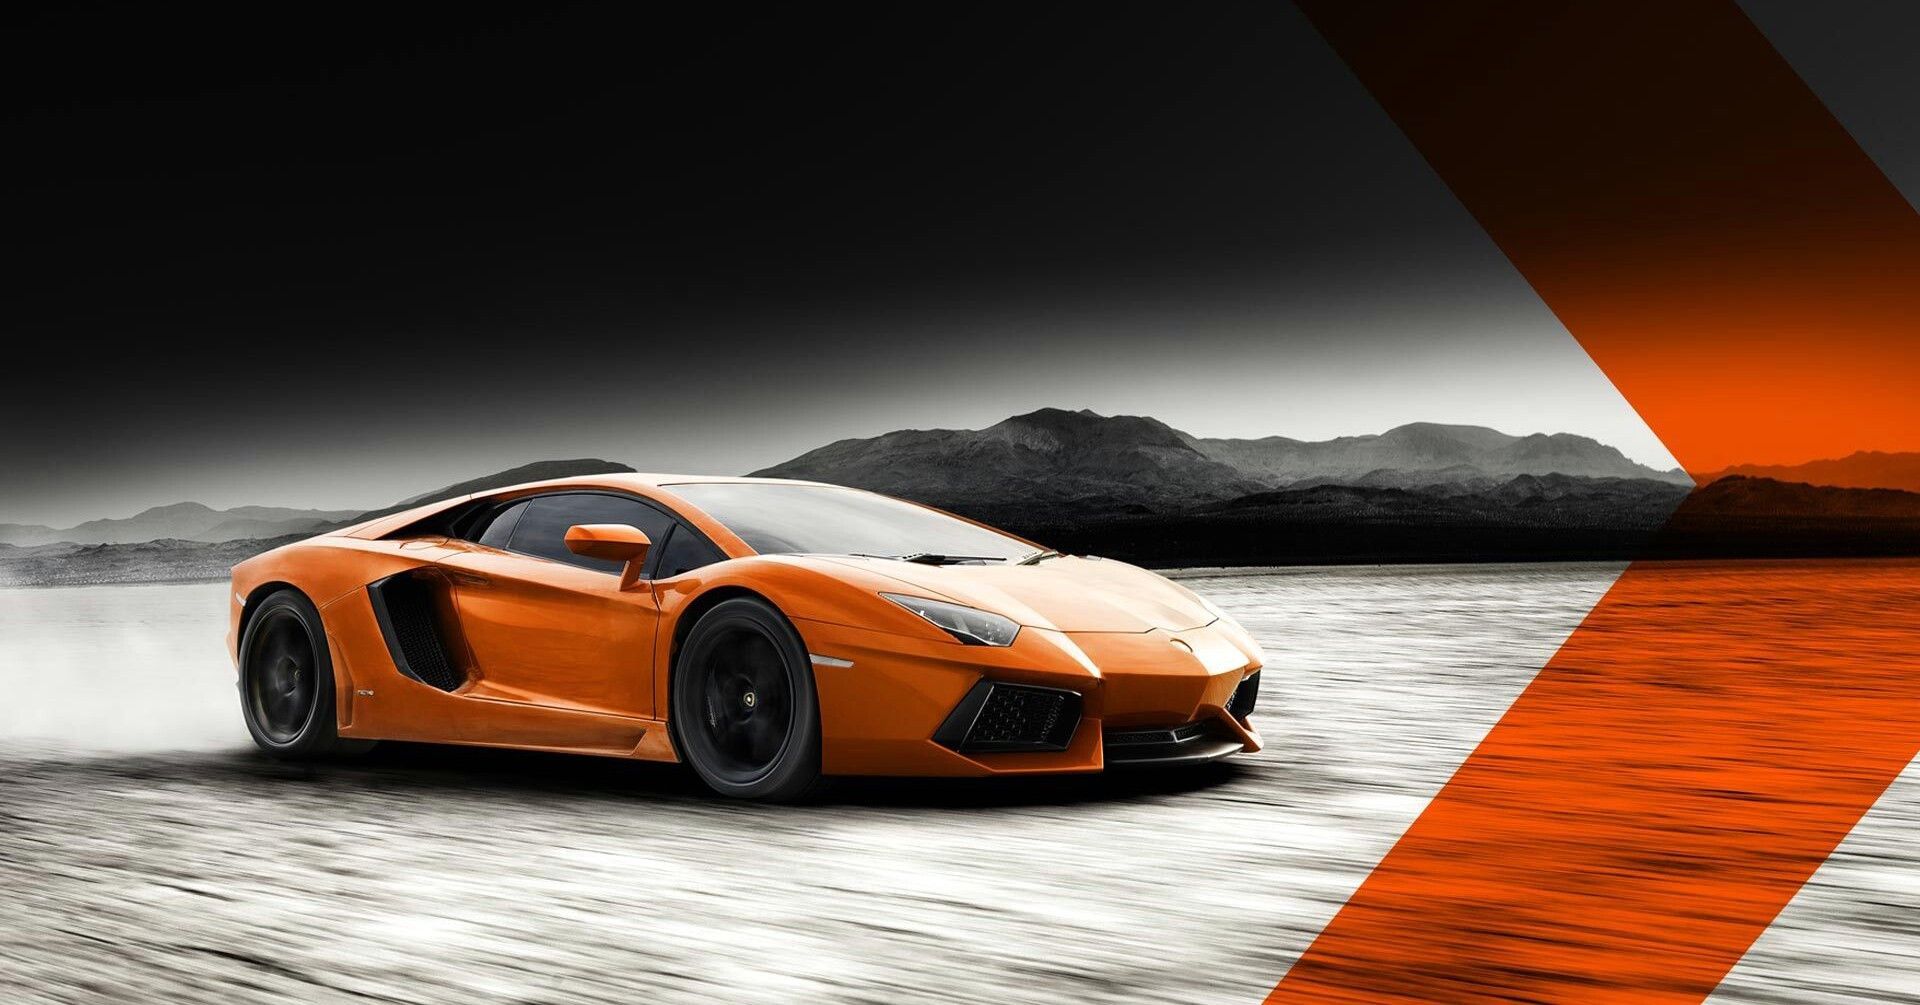 Super Cars Wallpapers - Widescreen HD Wallpapers